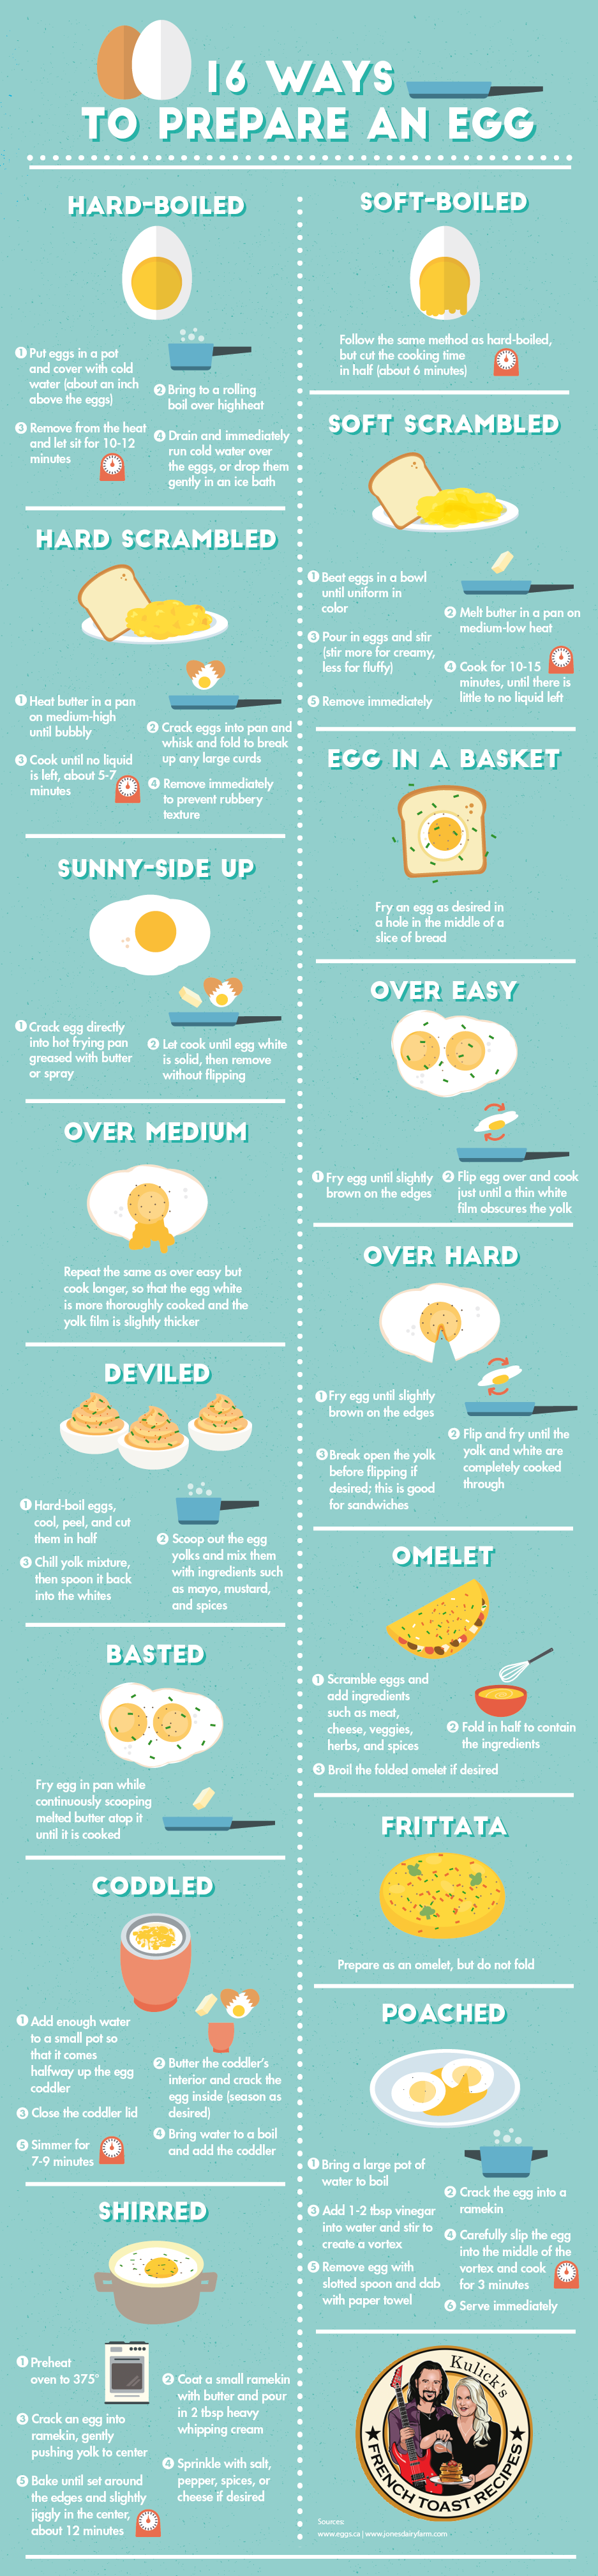 16 Ways to Prepare an Egg